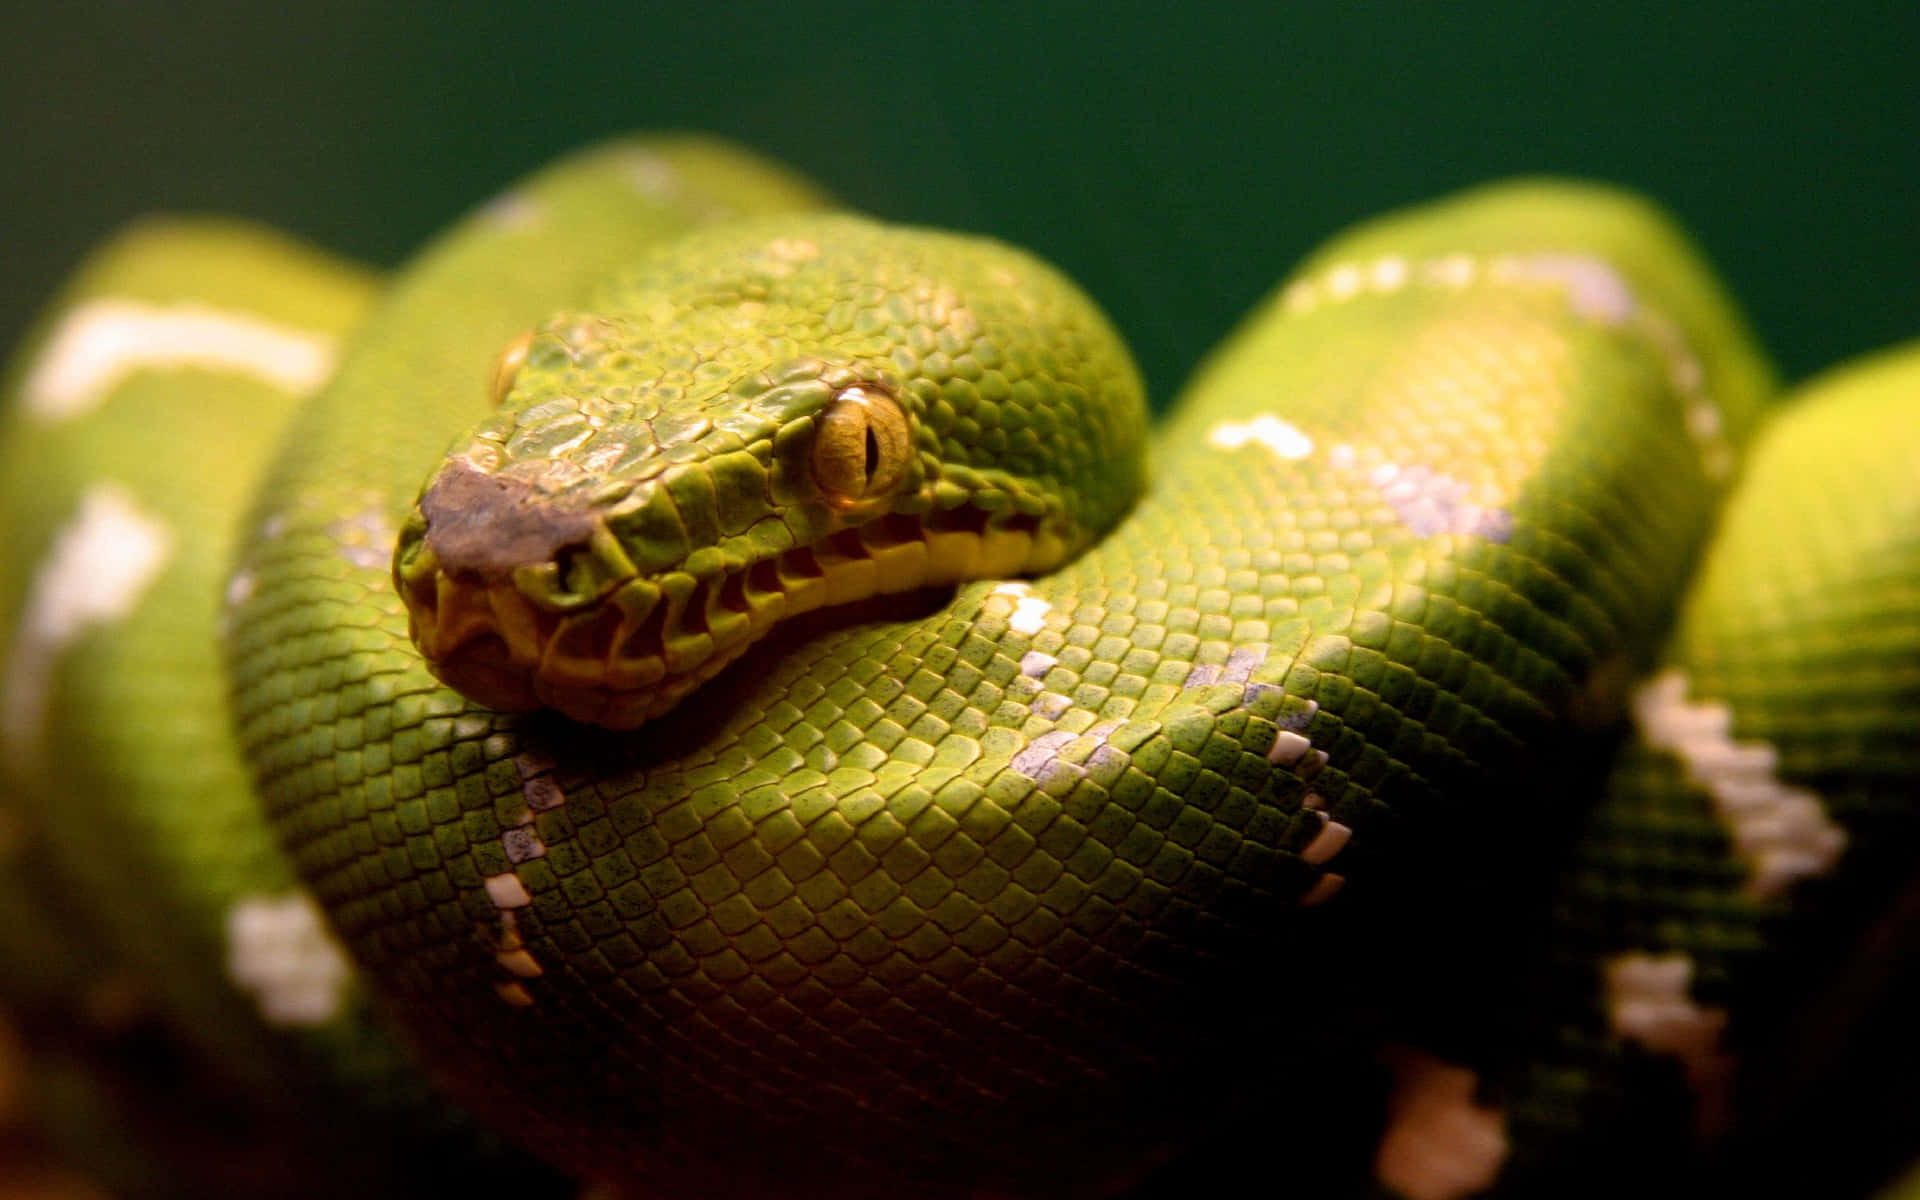 "A cool-coloured snake slithers up a rock face." Wallpaper